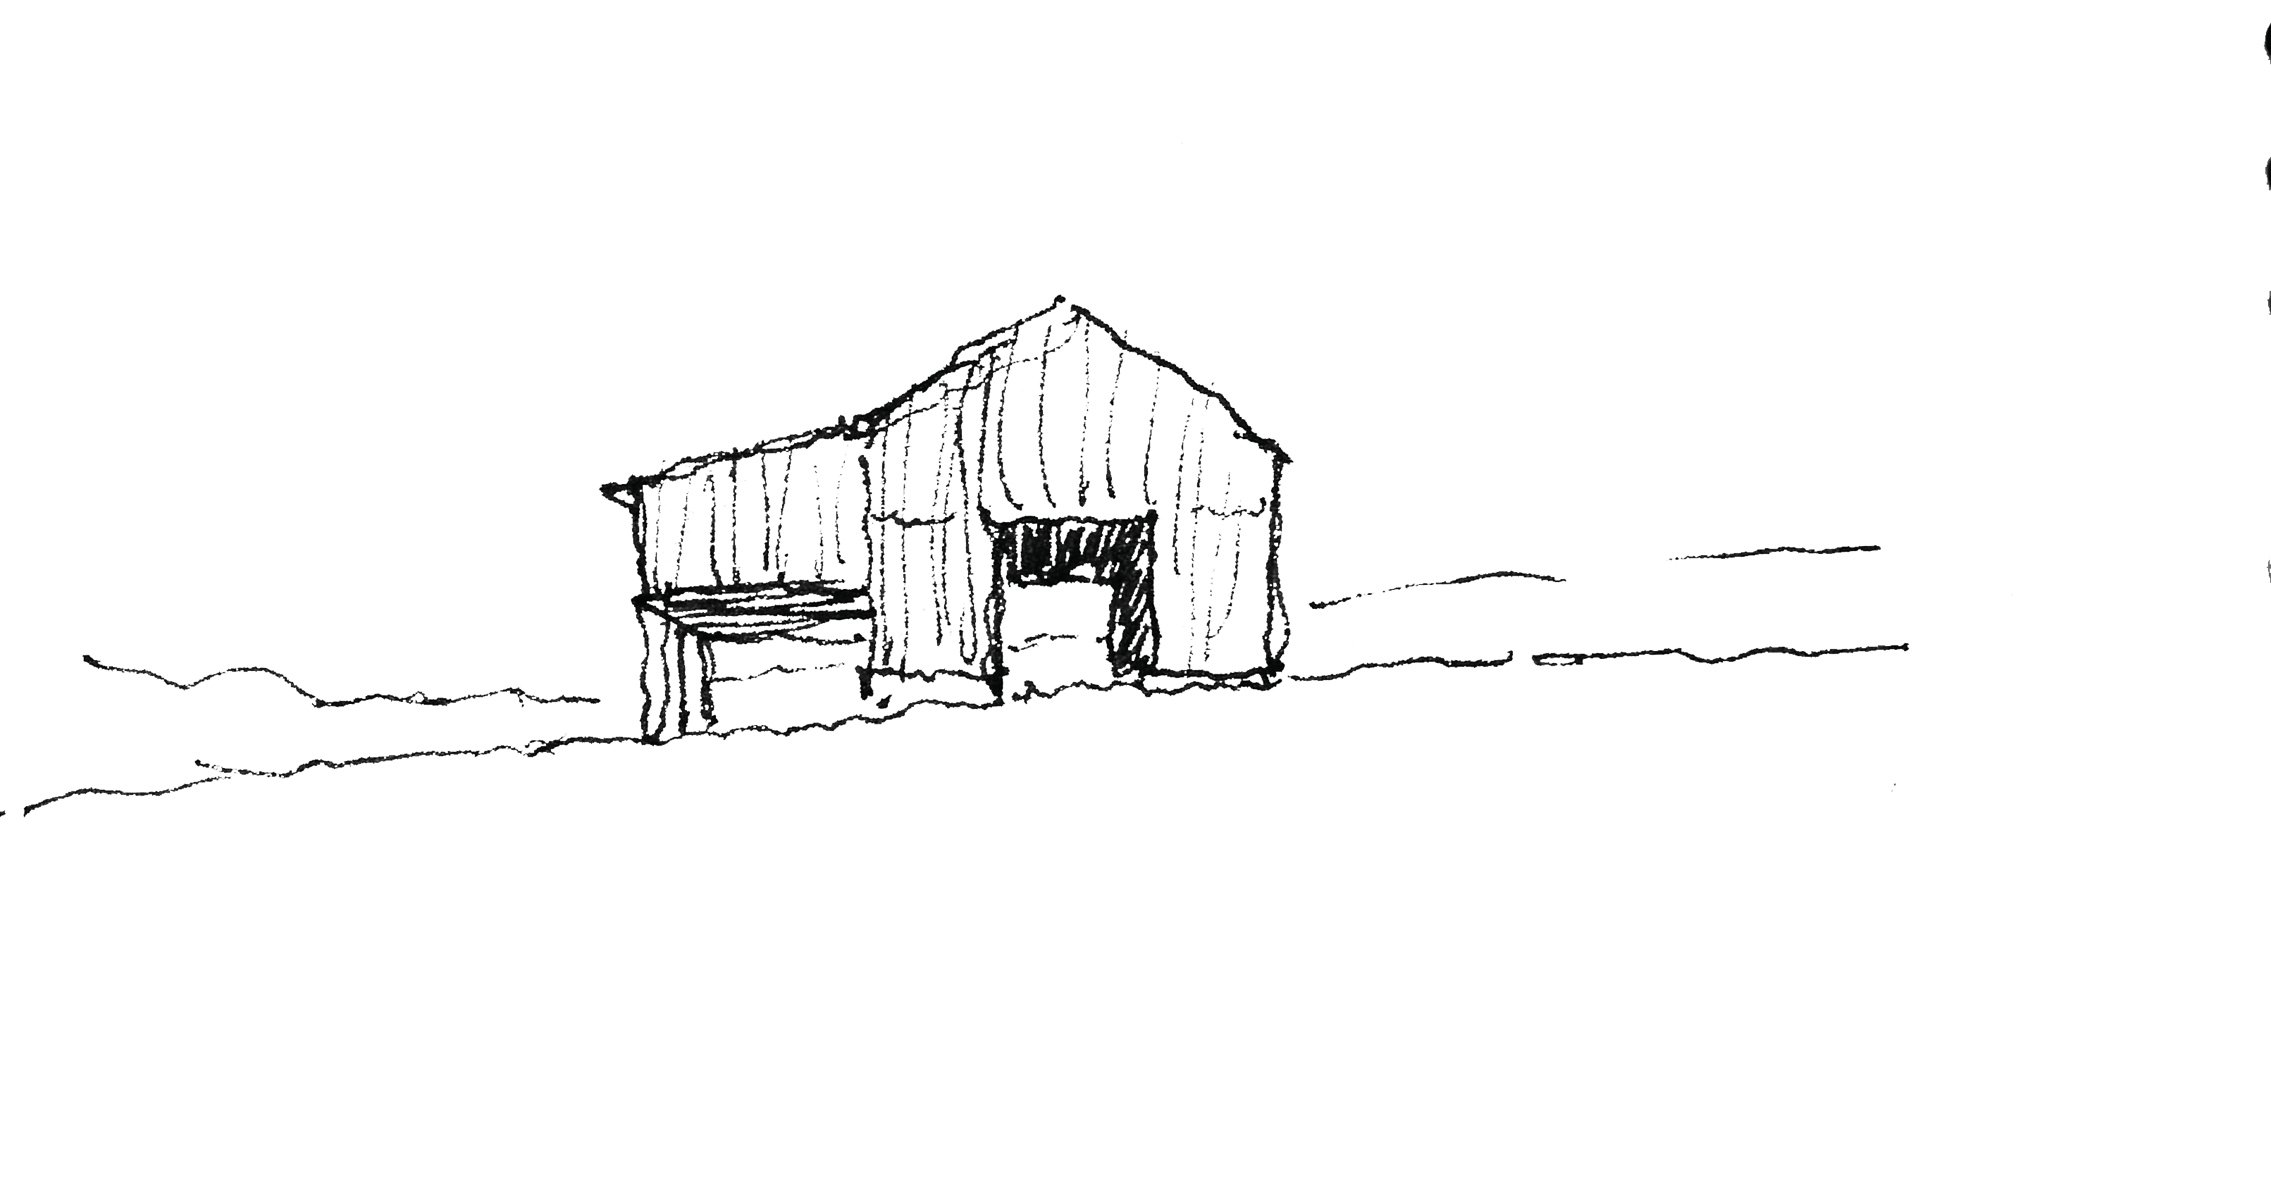 Watercolour sketch of corrugated roof barn, in desolate landscape, Native Places in khaki font above